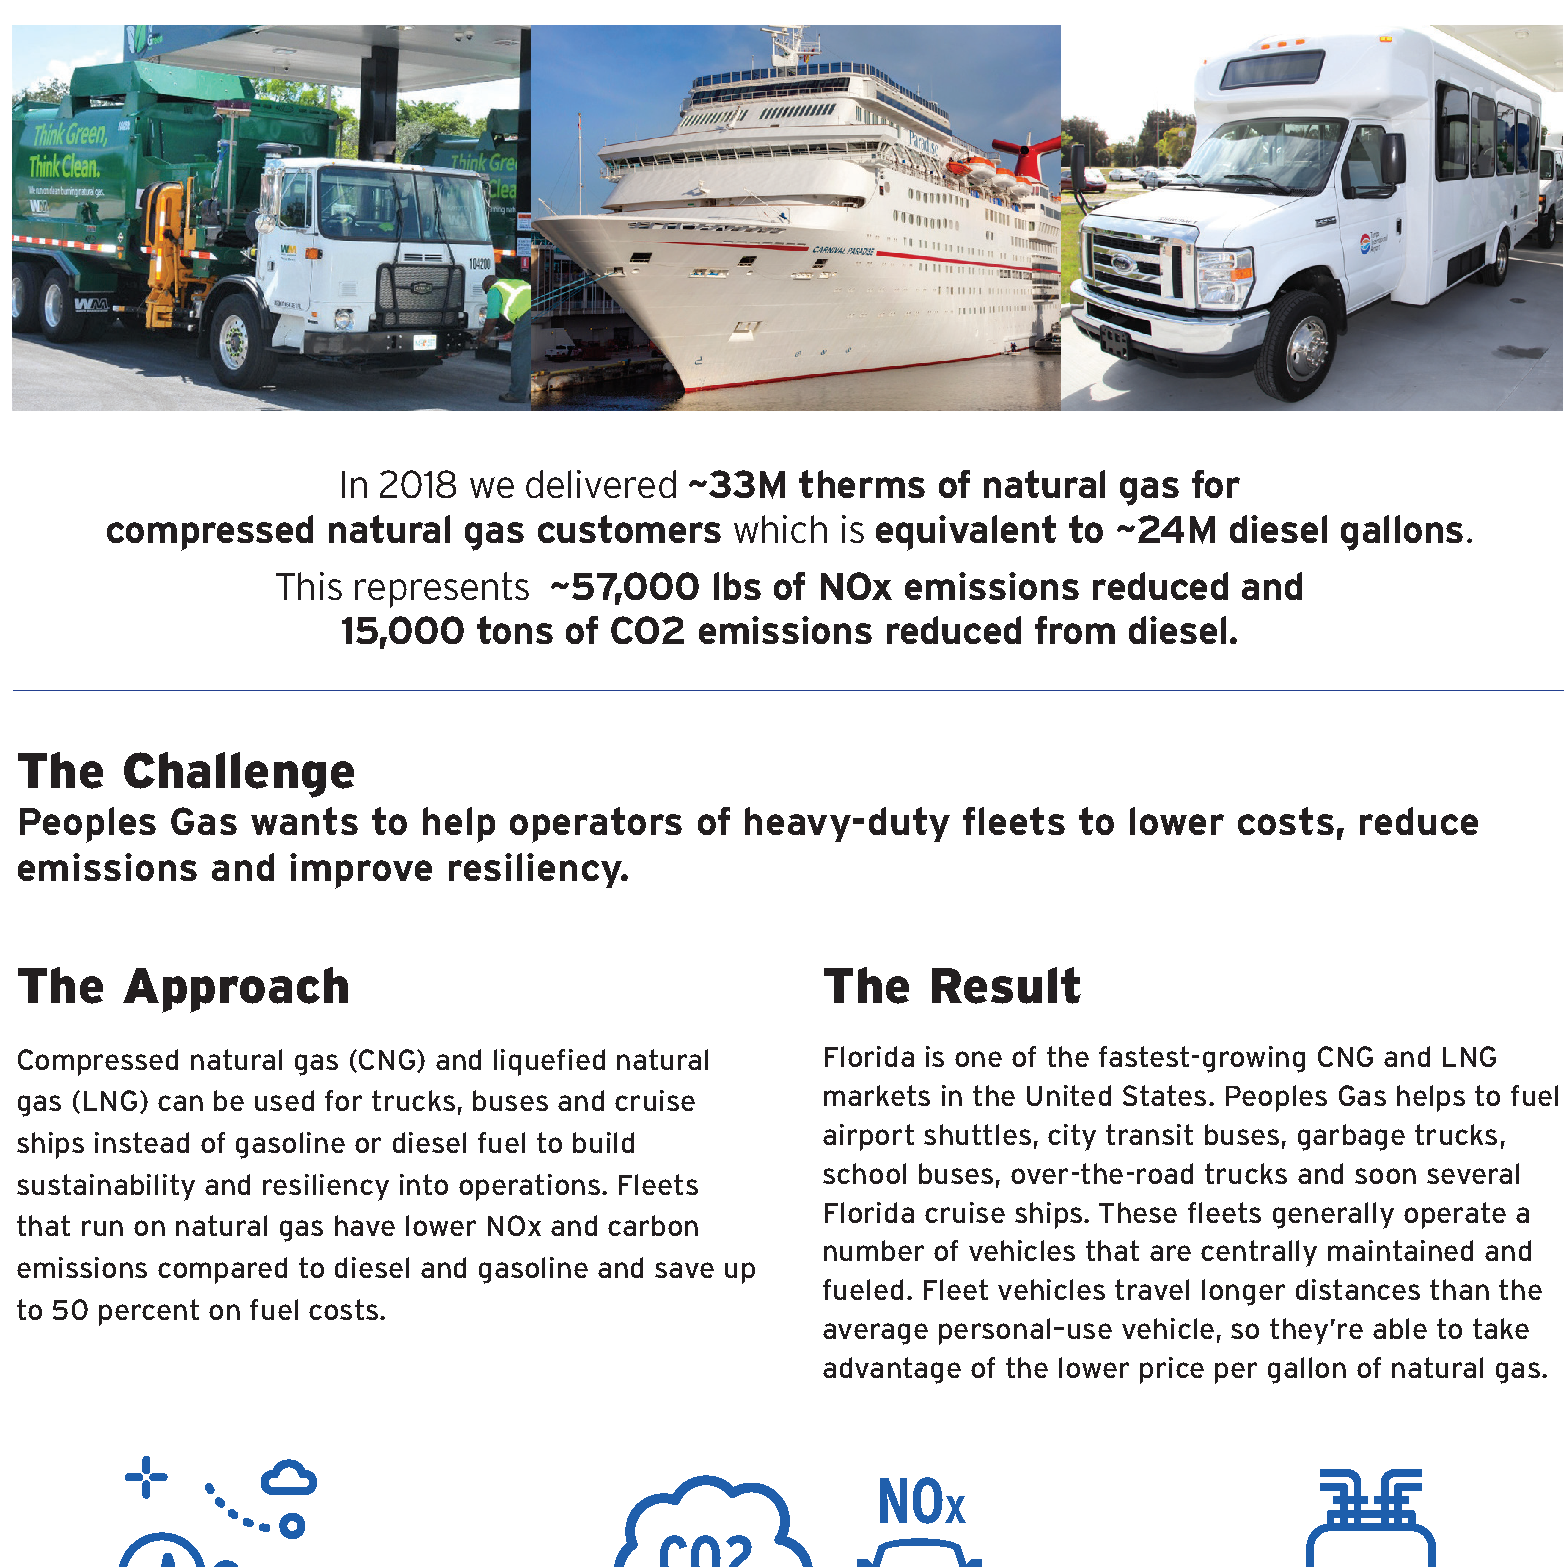 Peoples Gas is helping heavy-duty fleets to lower costs, reduce emissions and improve resiliency